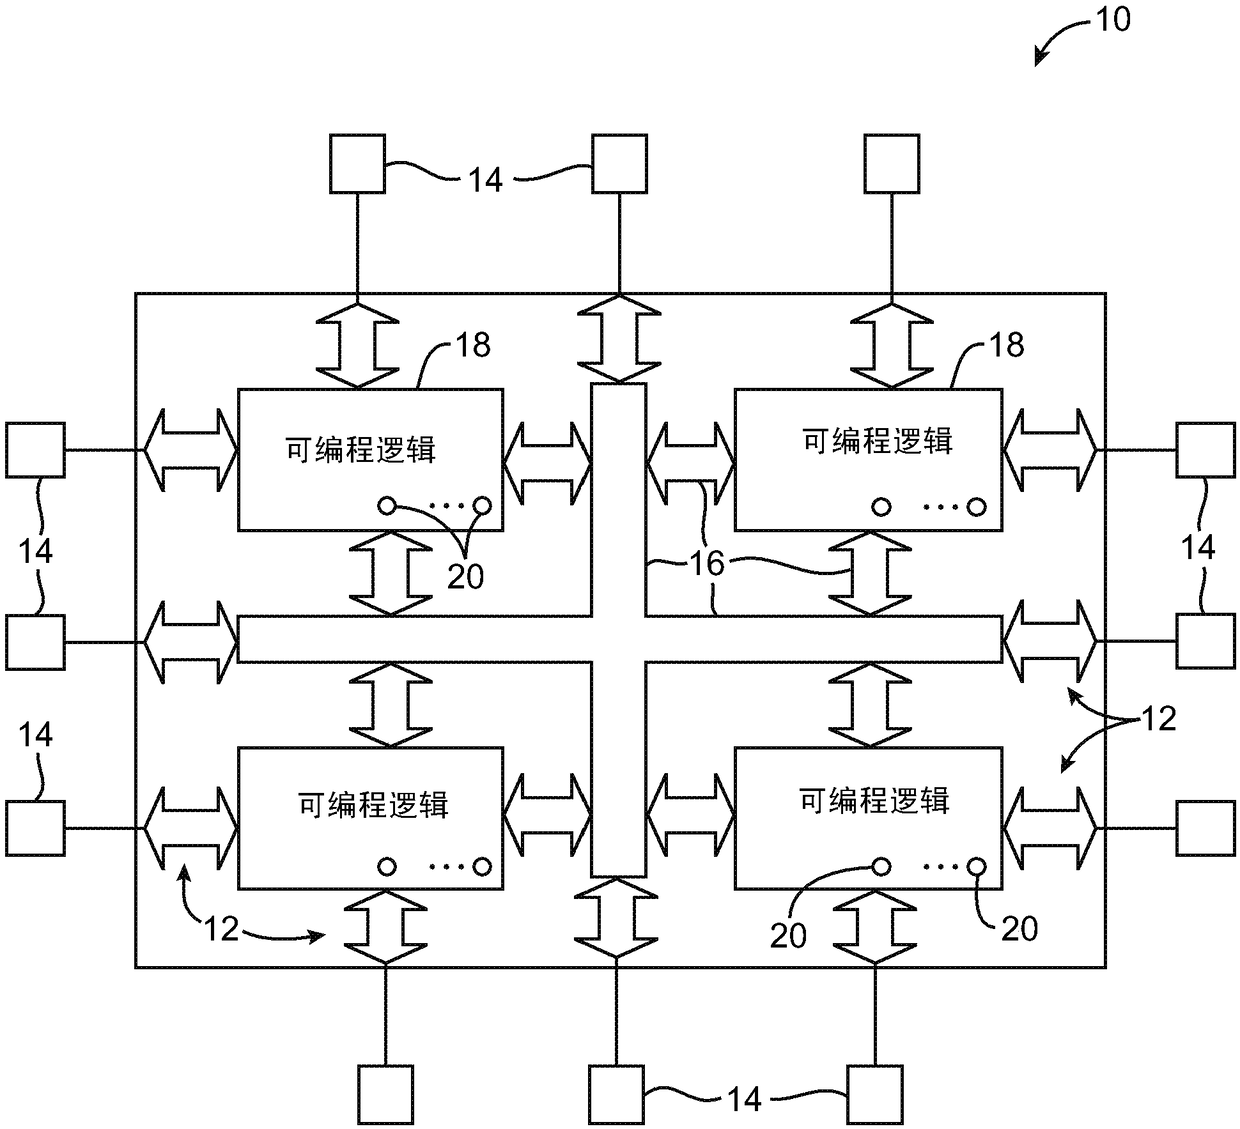 Memory with single-event latchup prevention circuitry